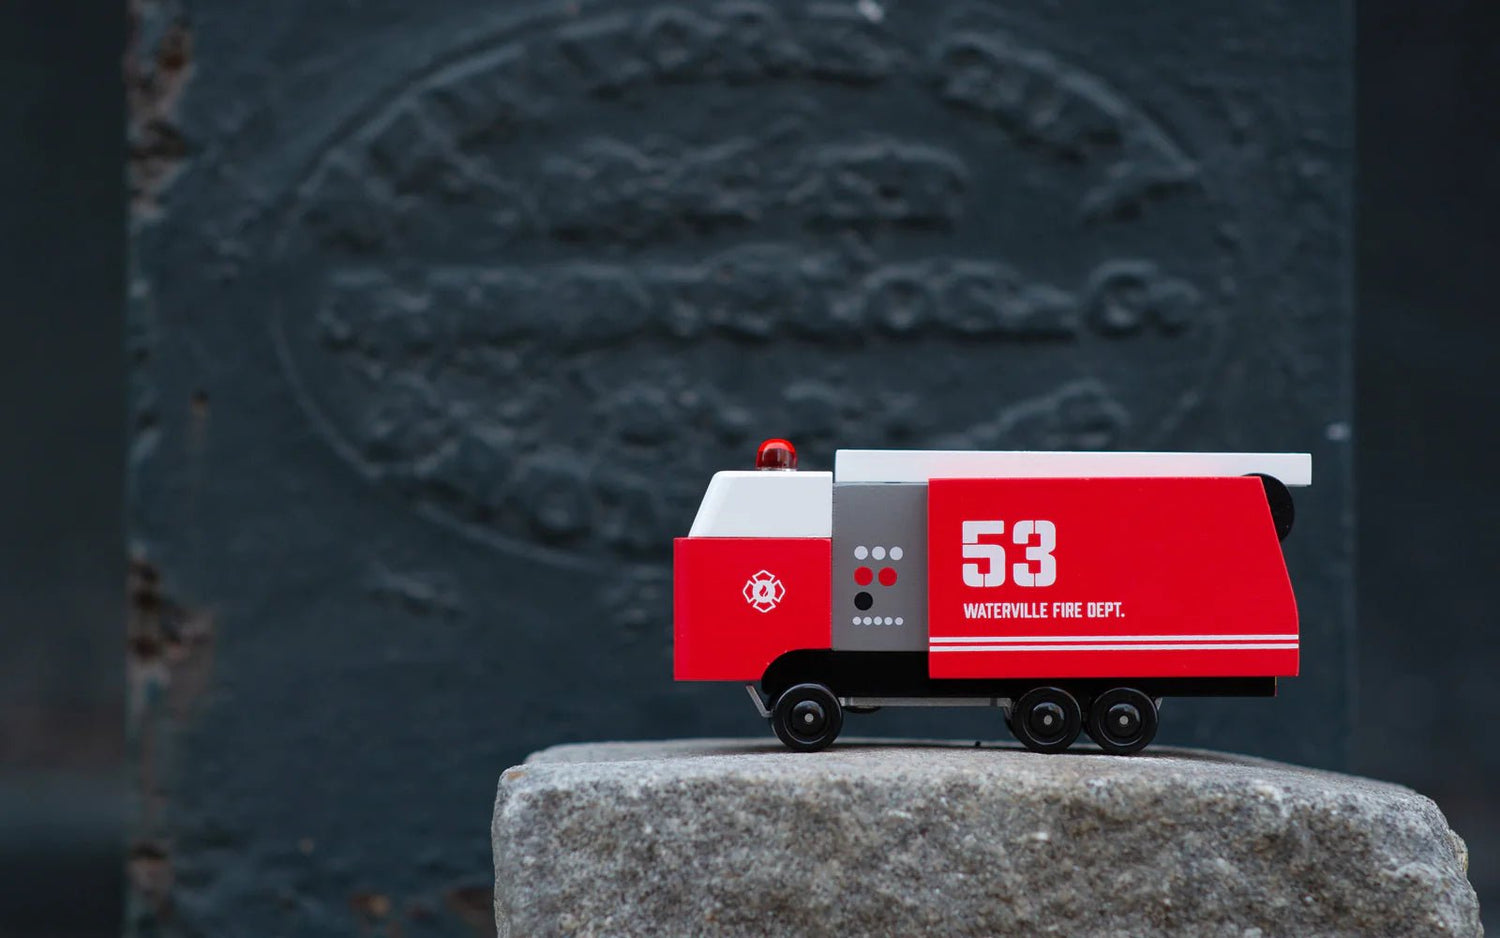 CANDYLAB | FIRE TRUCK by CANDYLAB - The Playful Collective